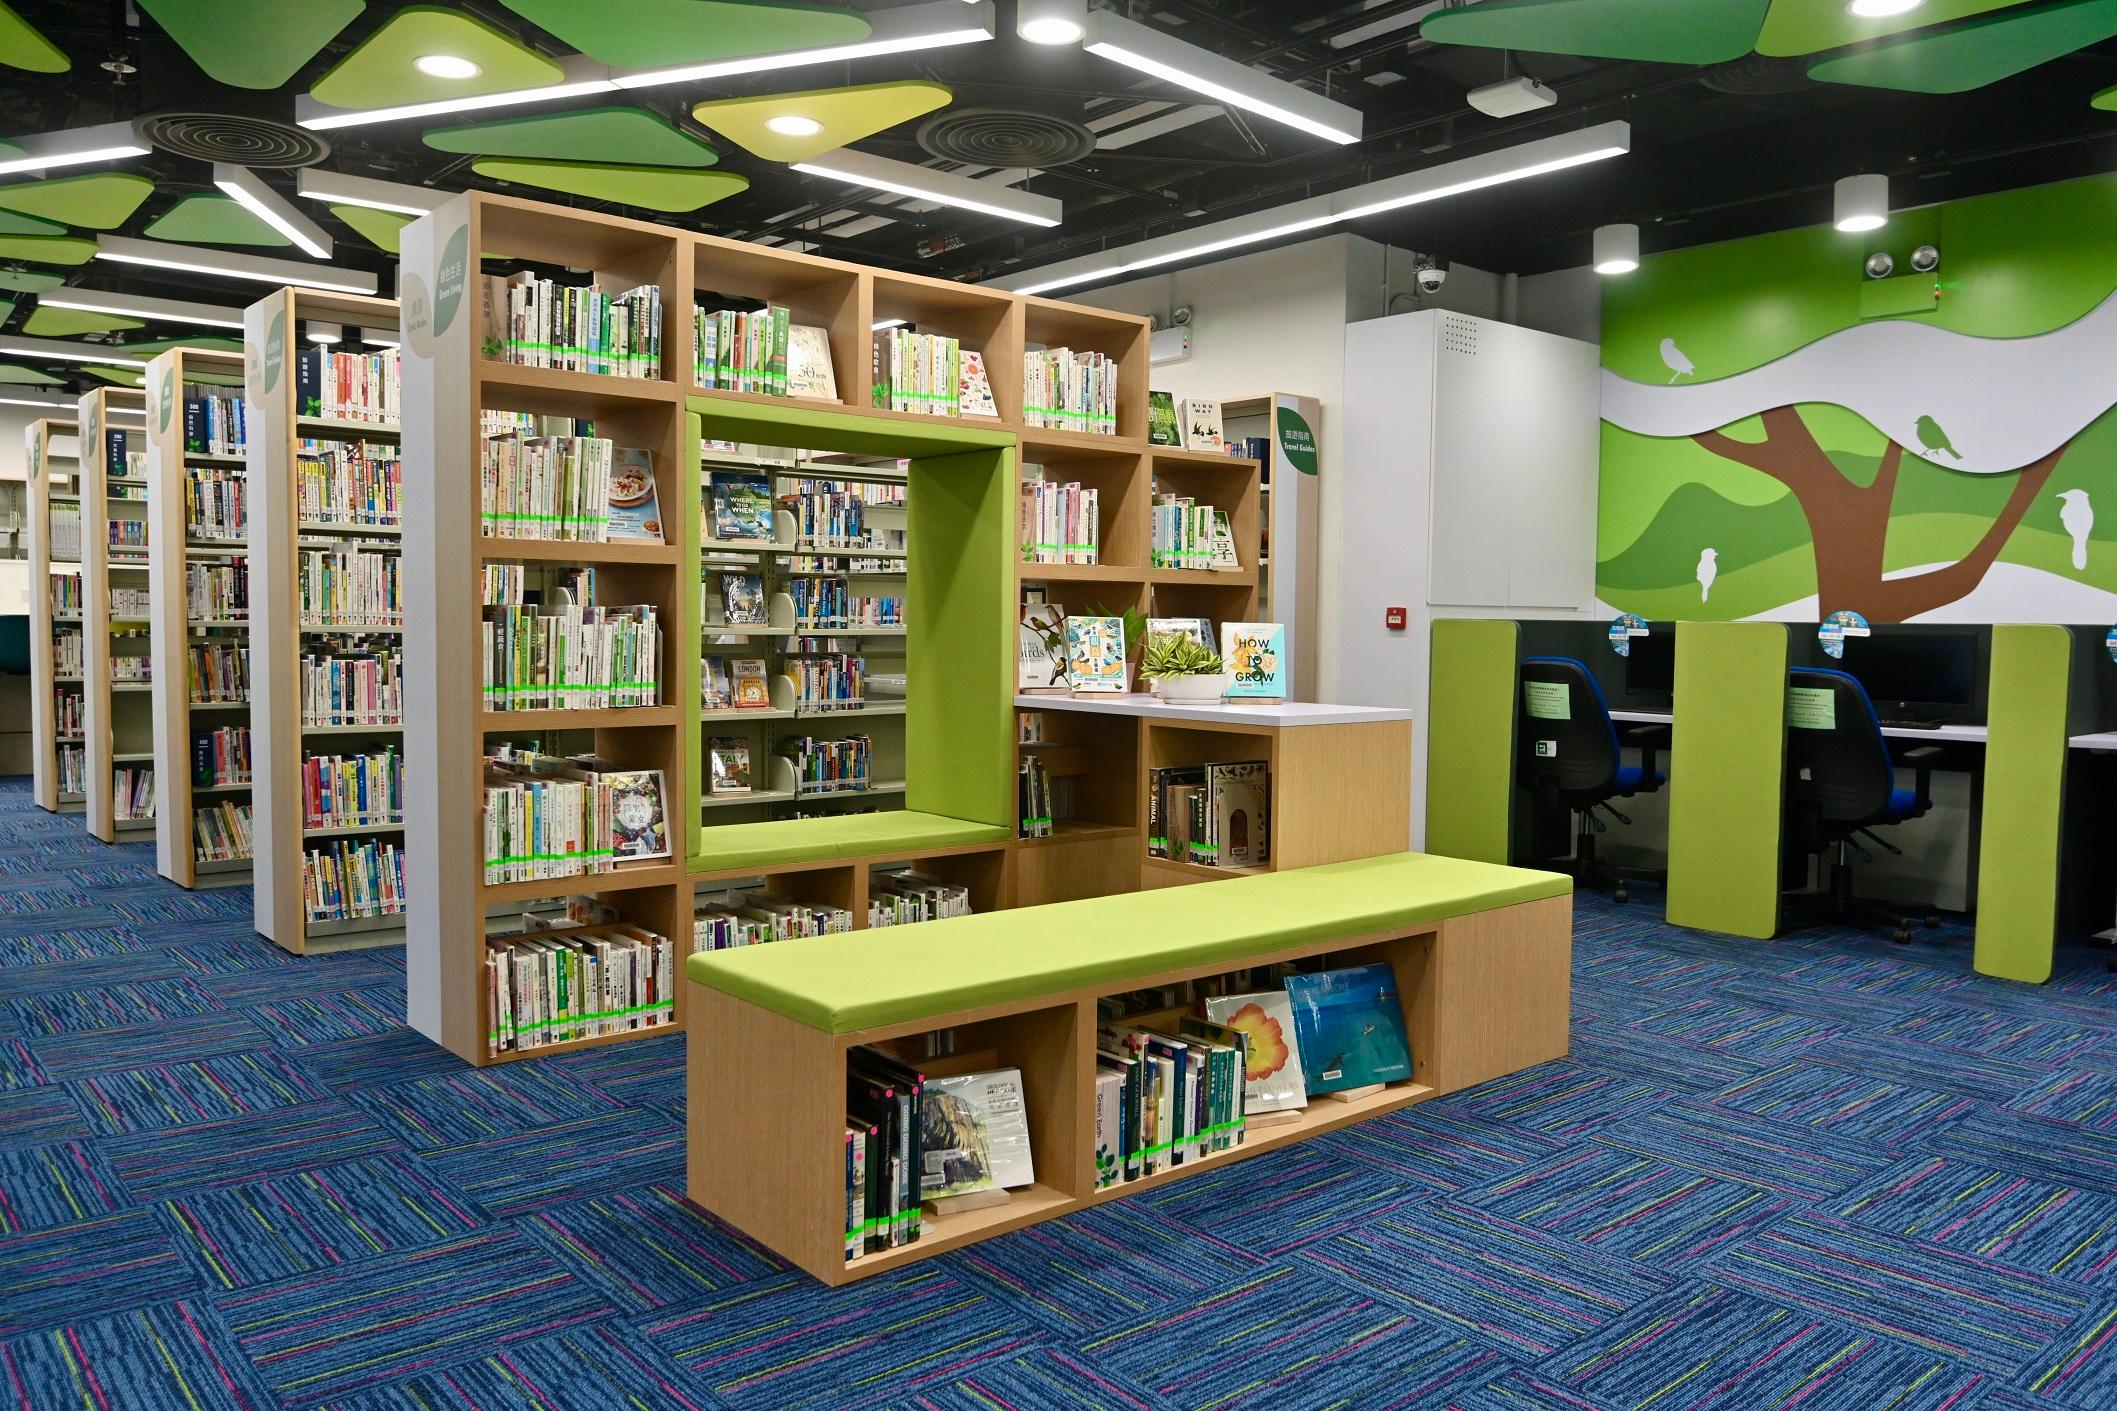 Fanling South Public Library will open at its new location at 9am on Tuesday (December 28). Photo shows the Adult Library of the new library.